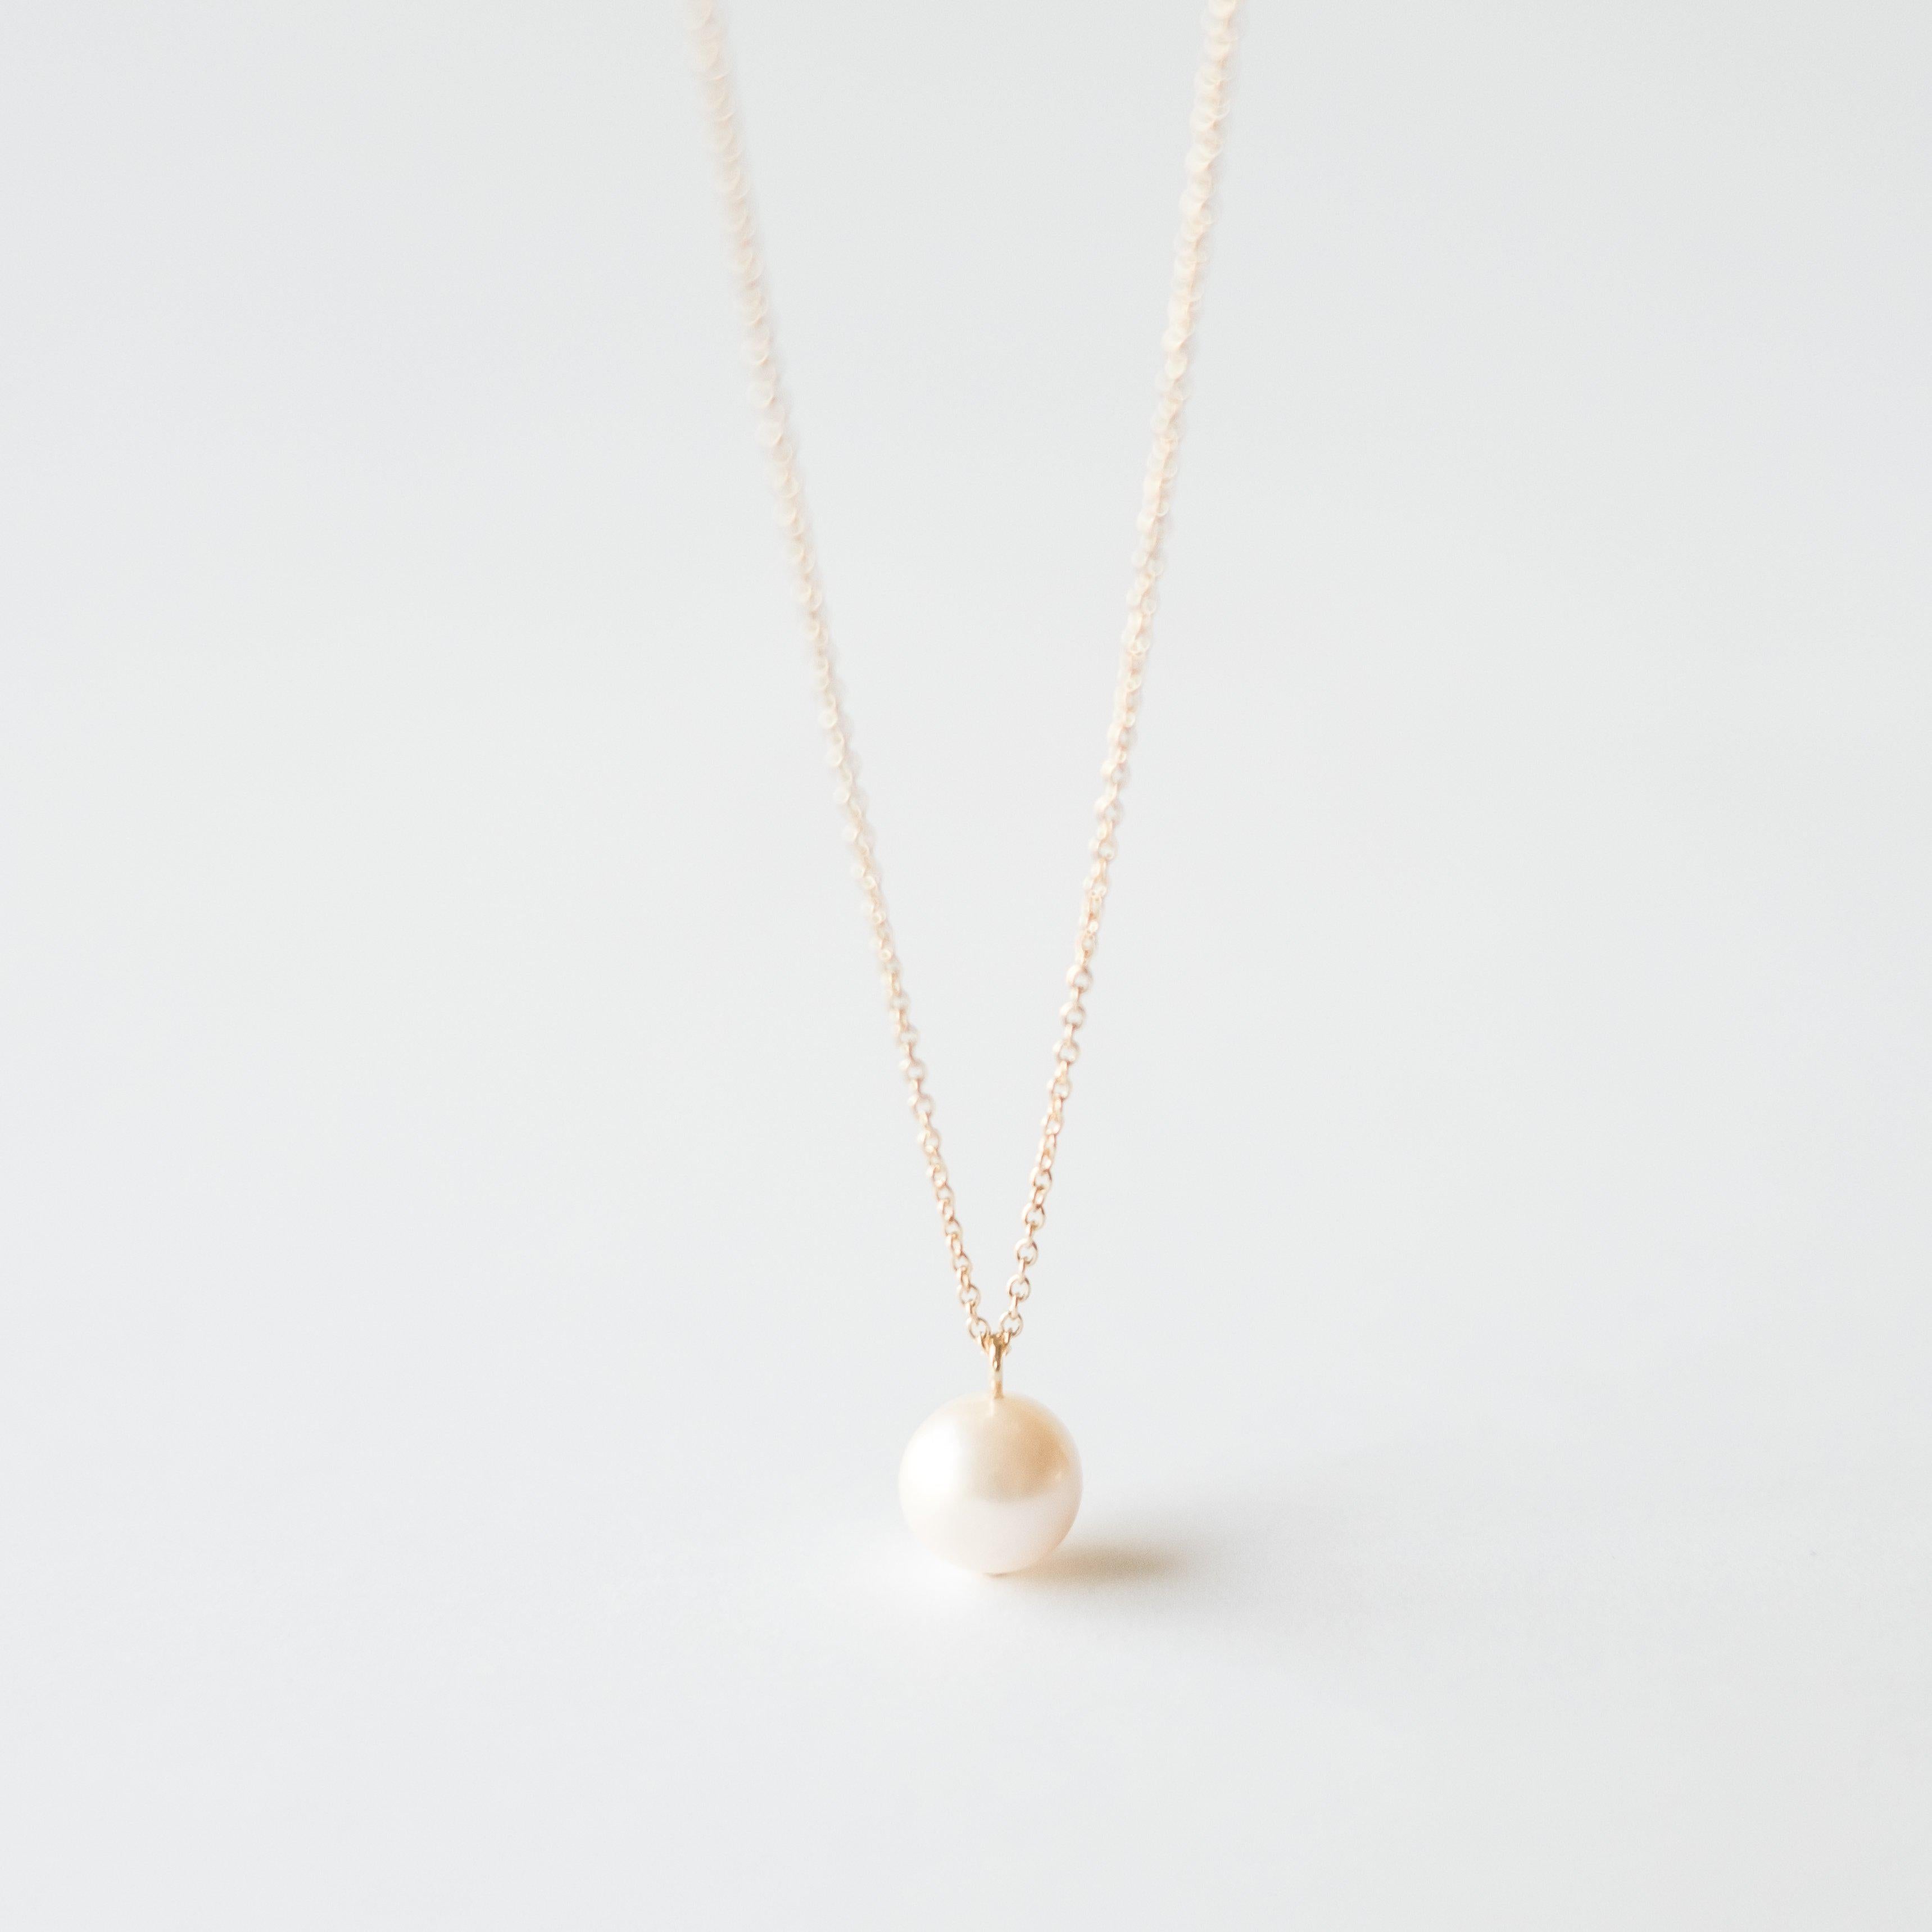 Freshwater Pearl Necklace in Gold